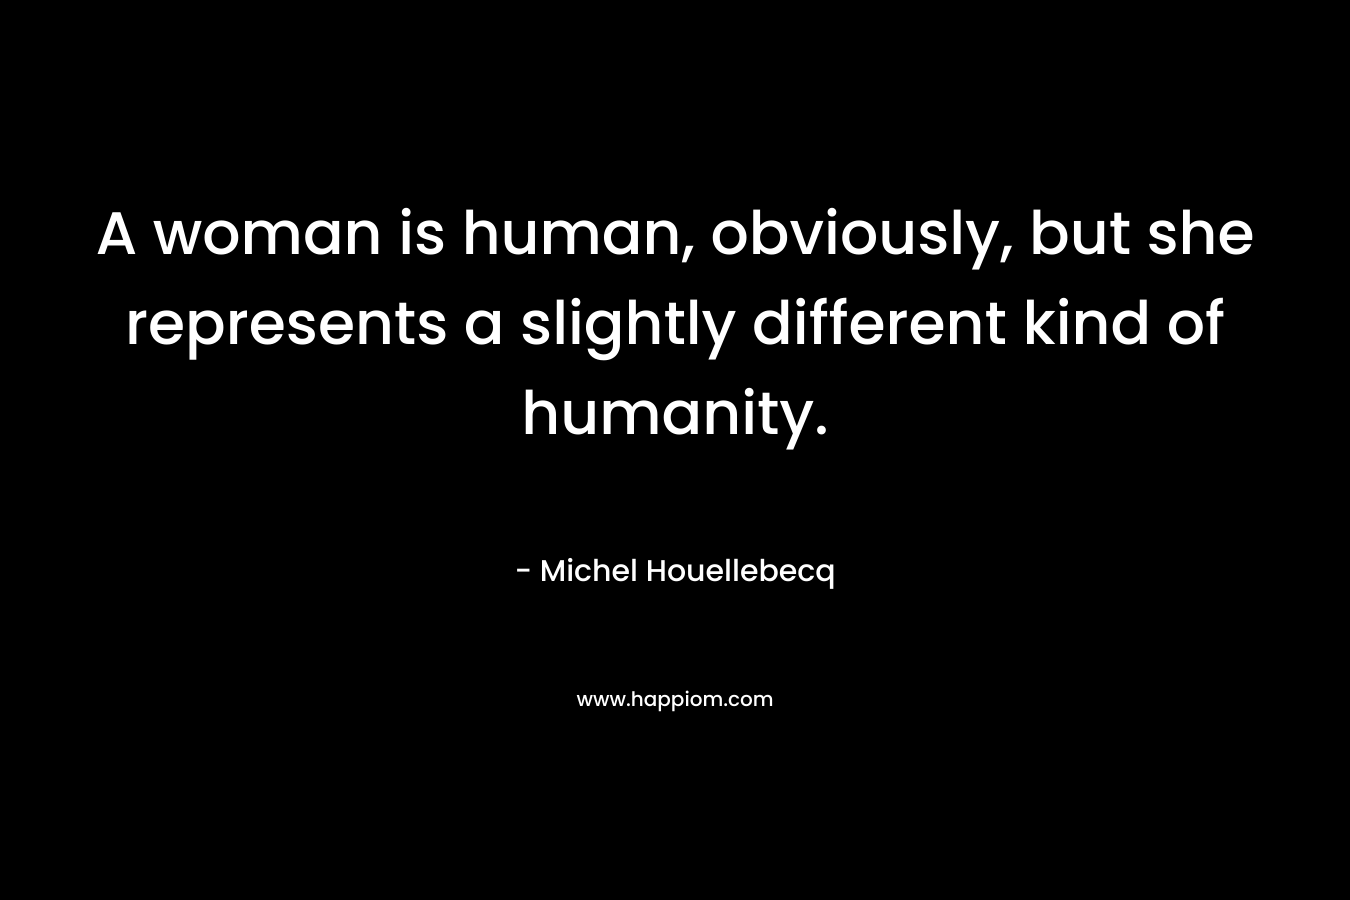 A woman is human, obviously, but she represents a slightly different kind of humanity.